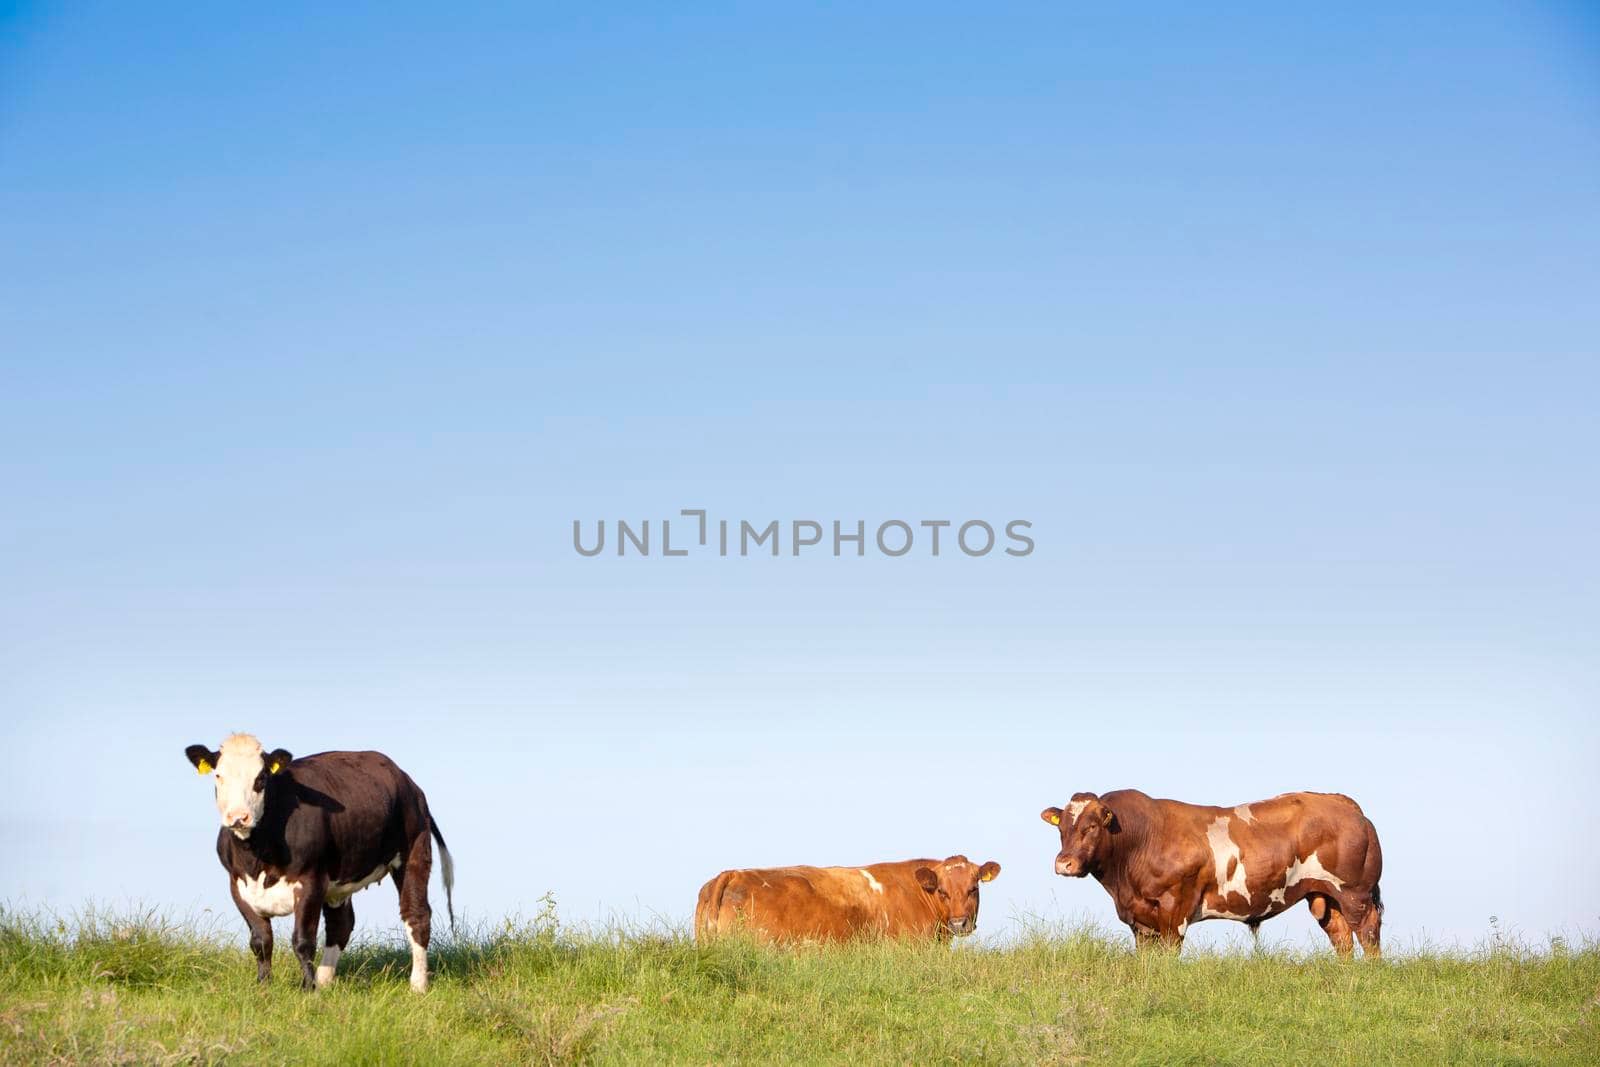 broen spotted bull and cows under blue sky in green grass on dike in holland by ahavelaar